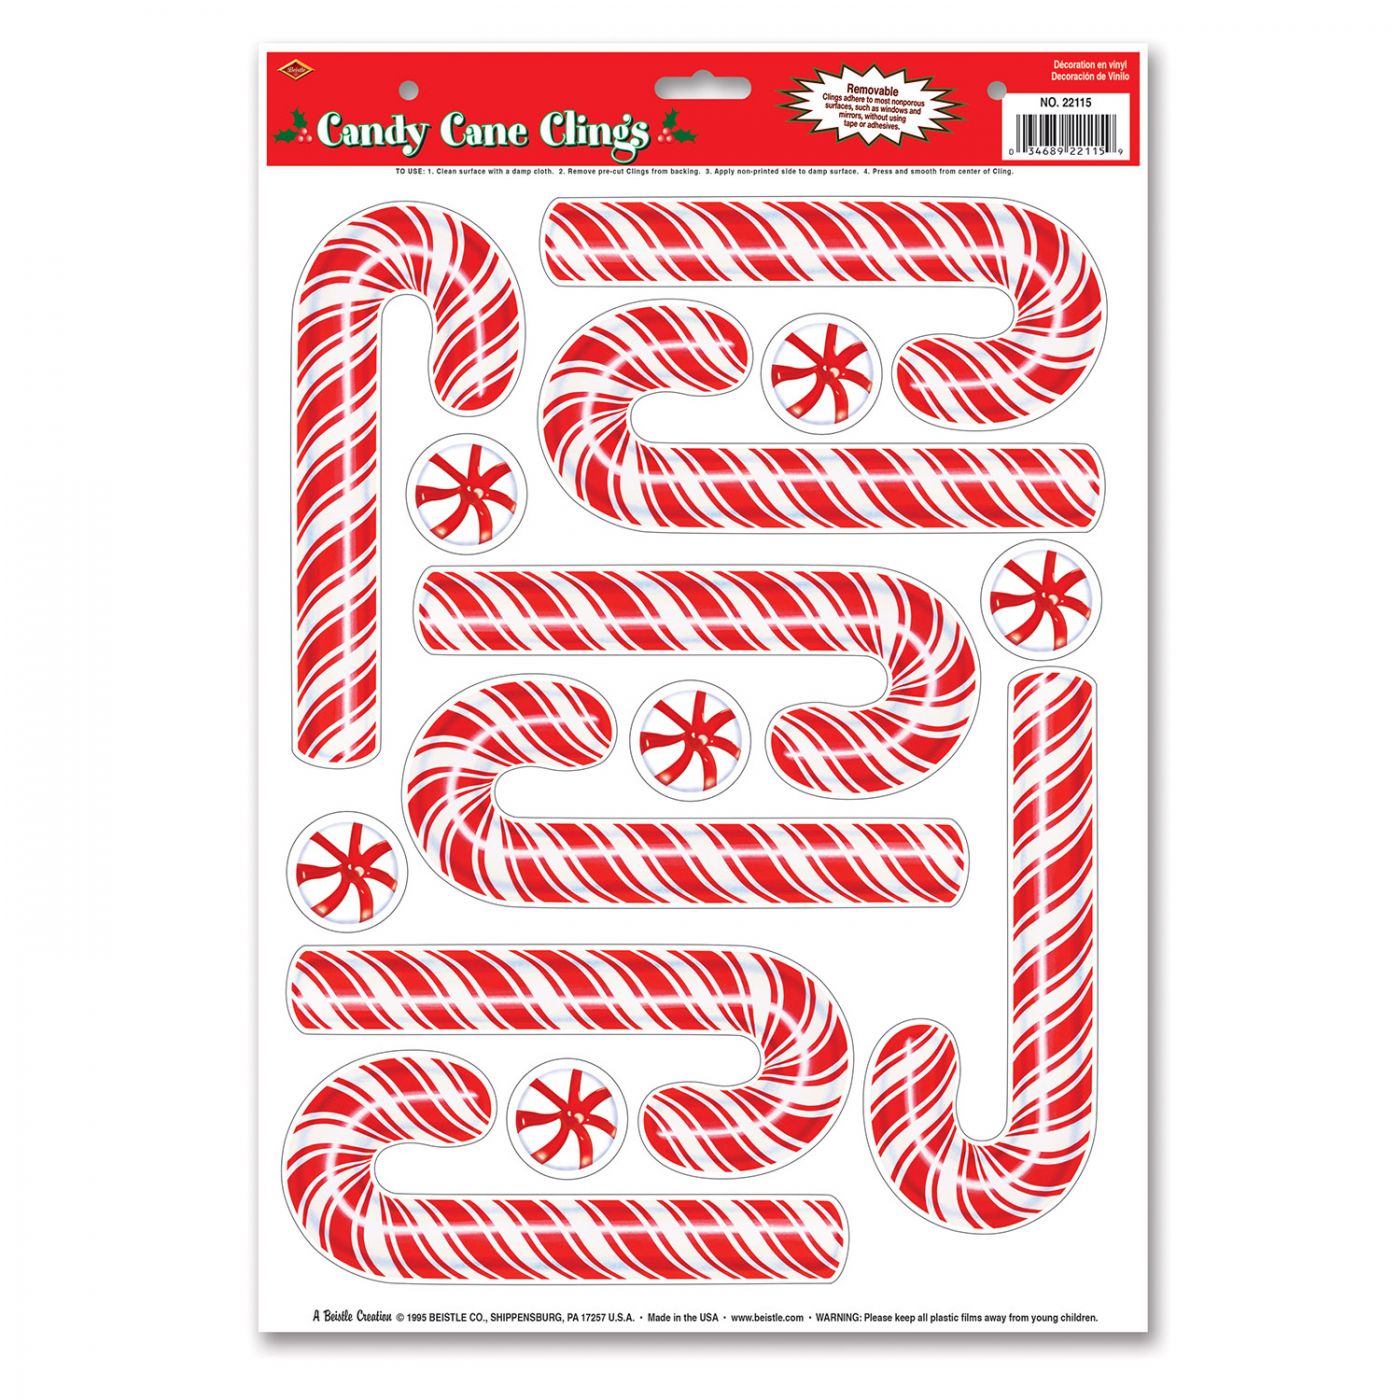 Candy Cane Clings image